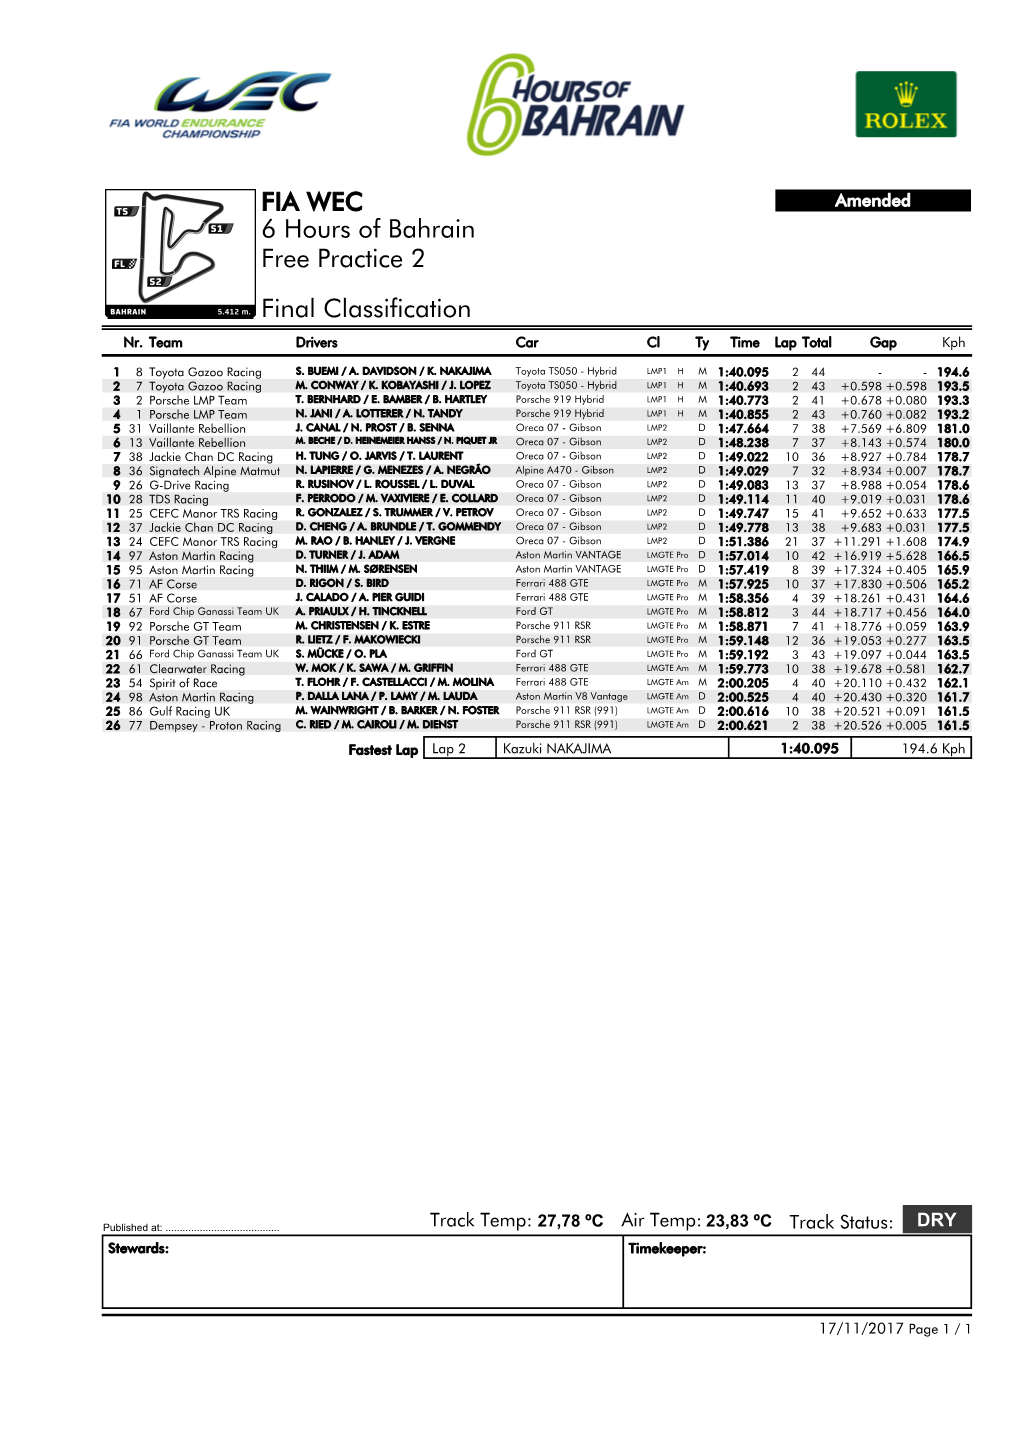 FIA WEC 6 Hours of Bahrain Free Practice 2 Final Classification